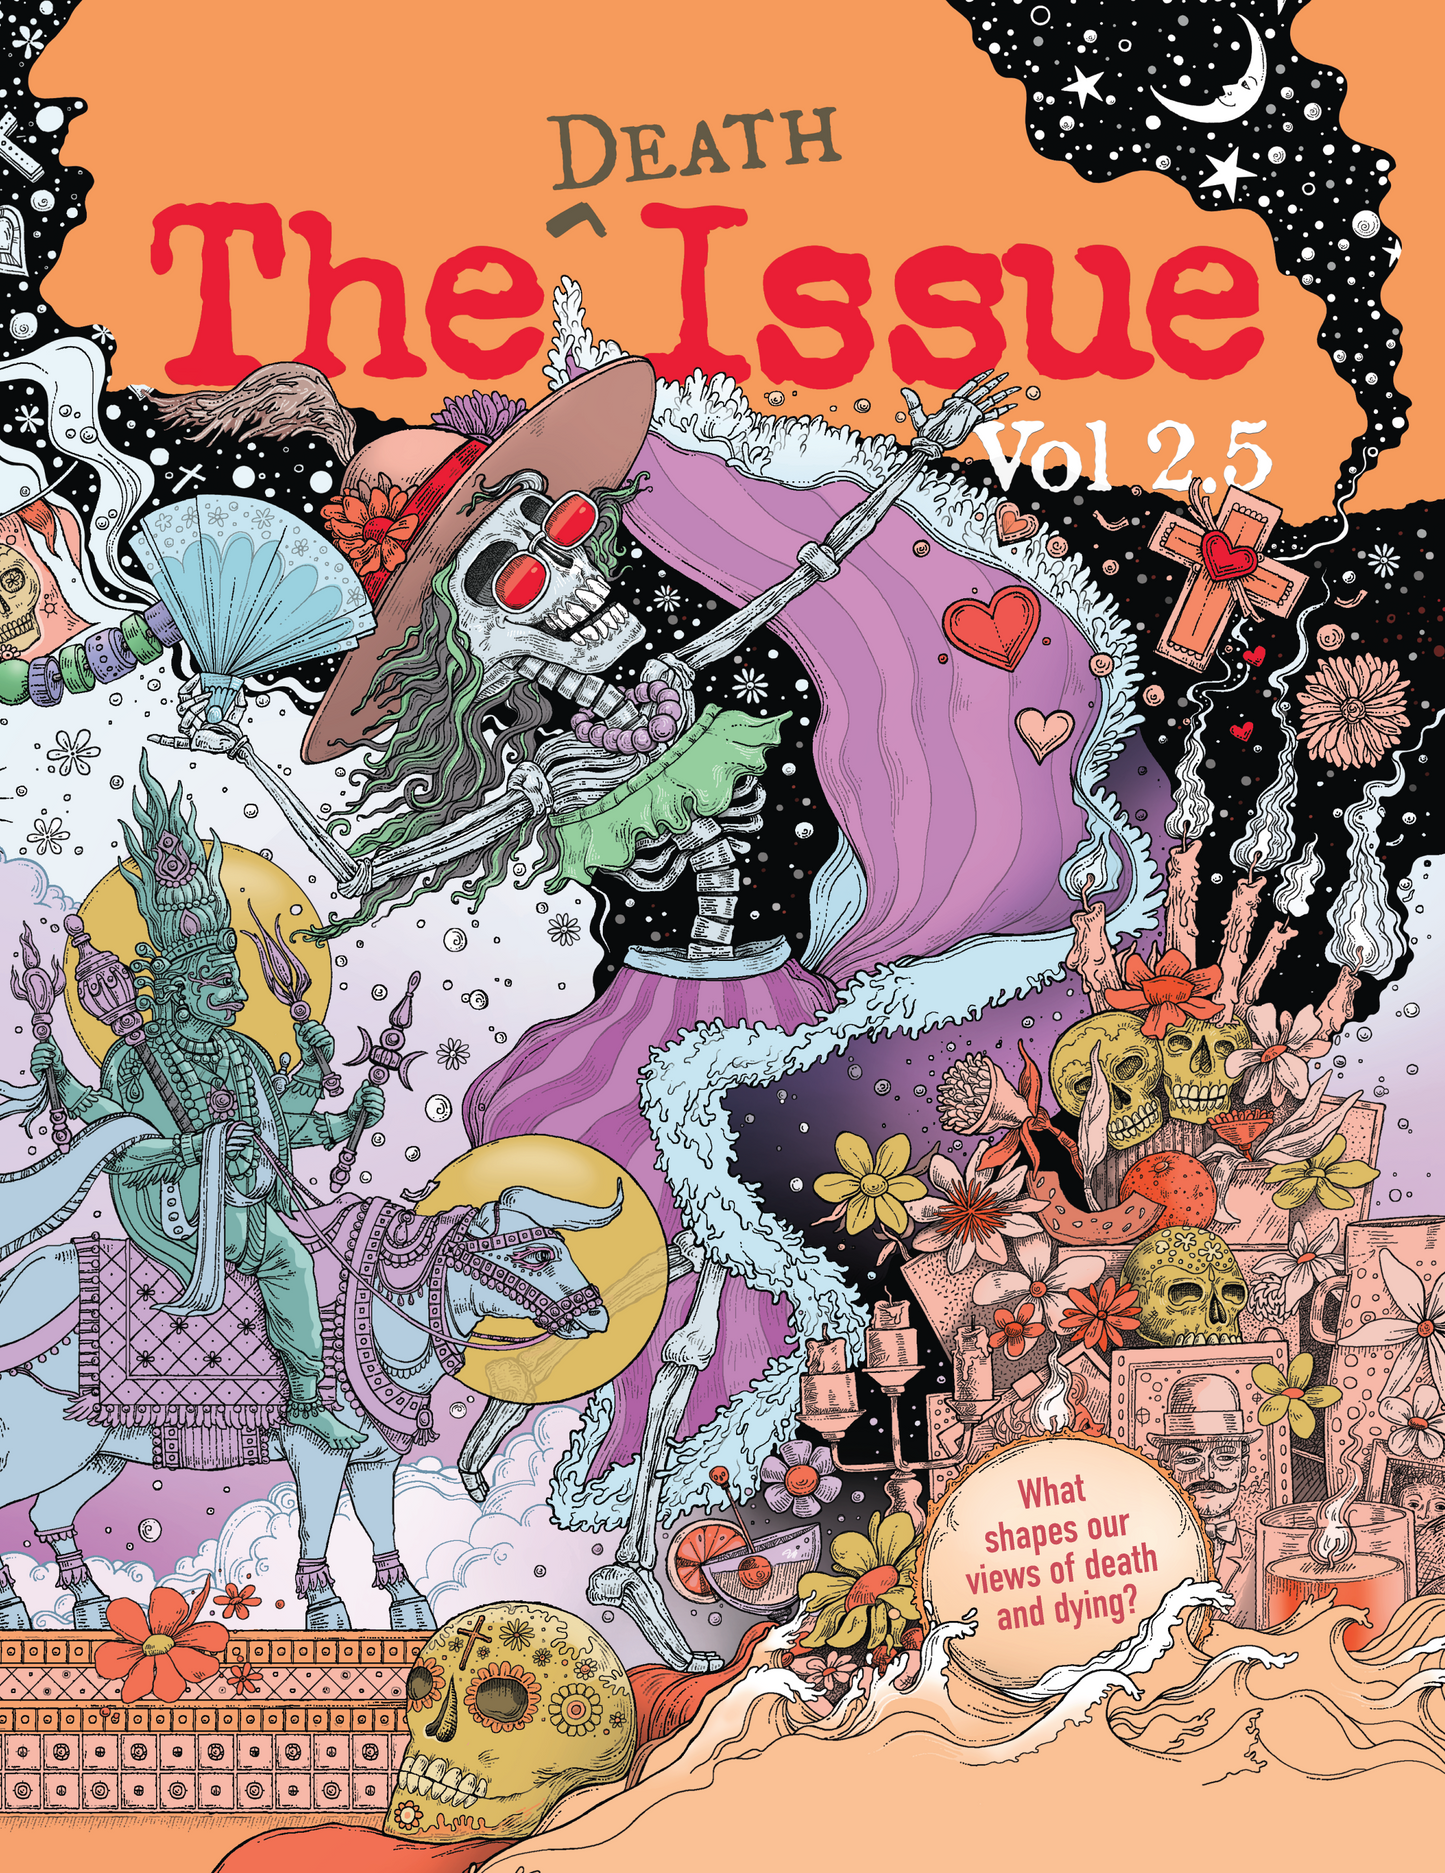 The Death Issue 2.5